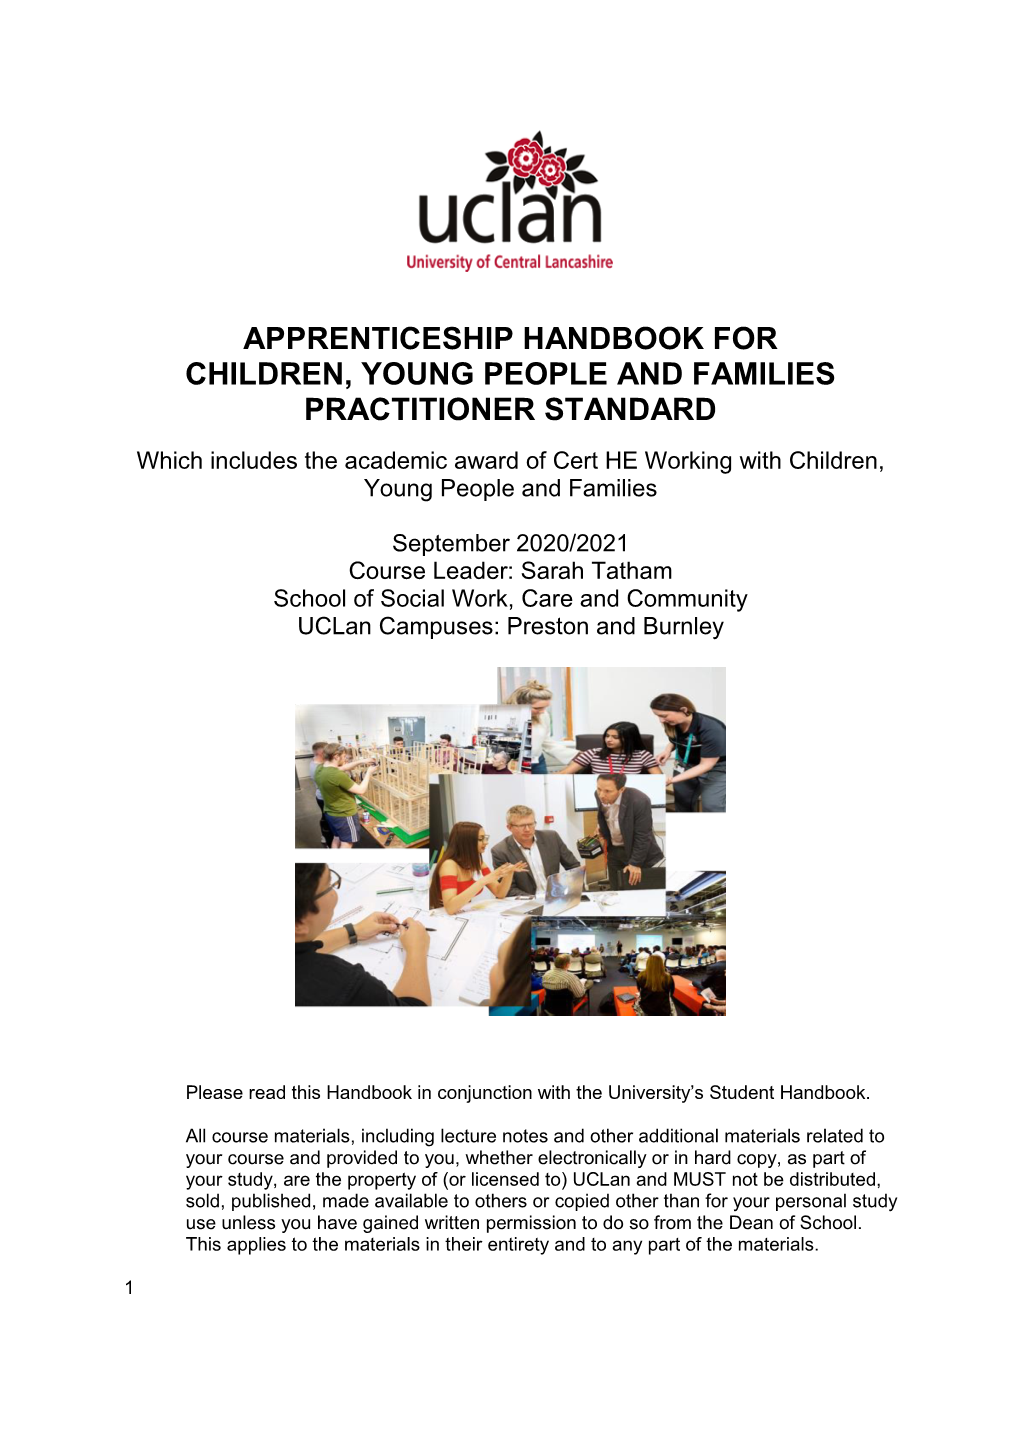 Apprenticeship Handbook for Children, Young People and Families Practitioner Standard